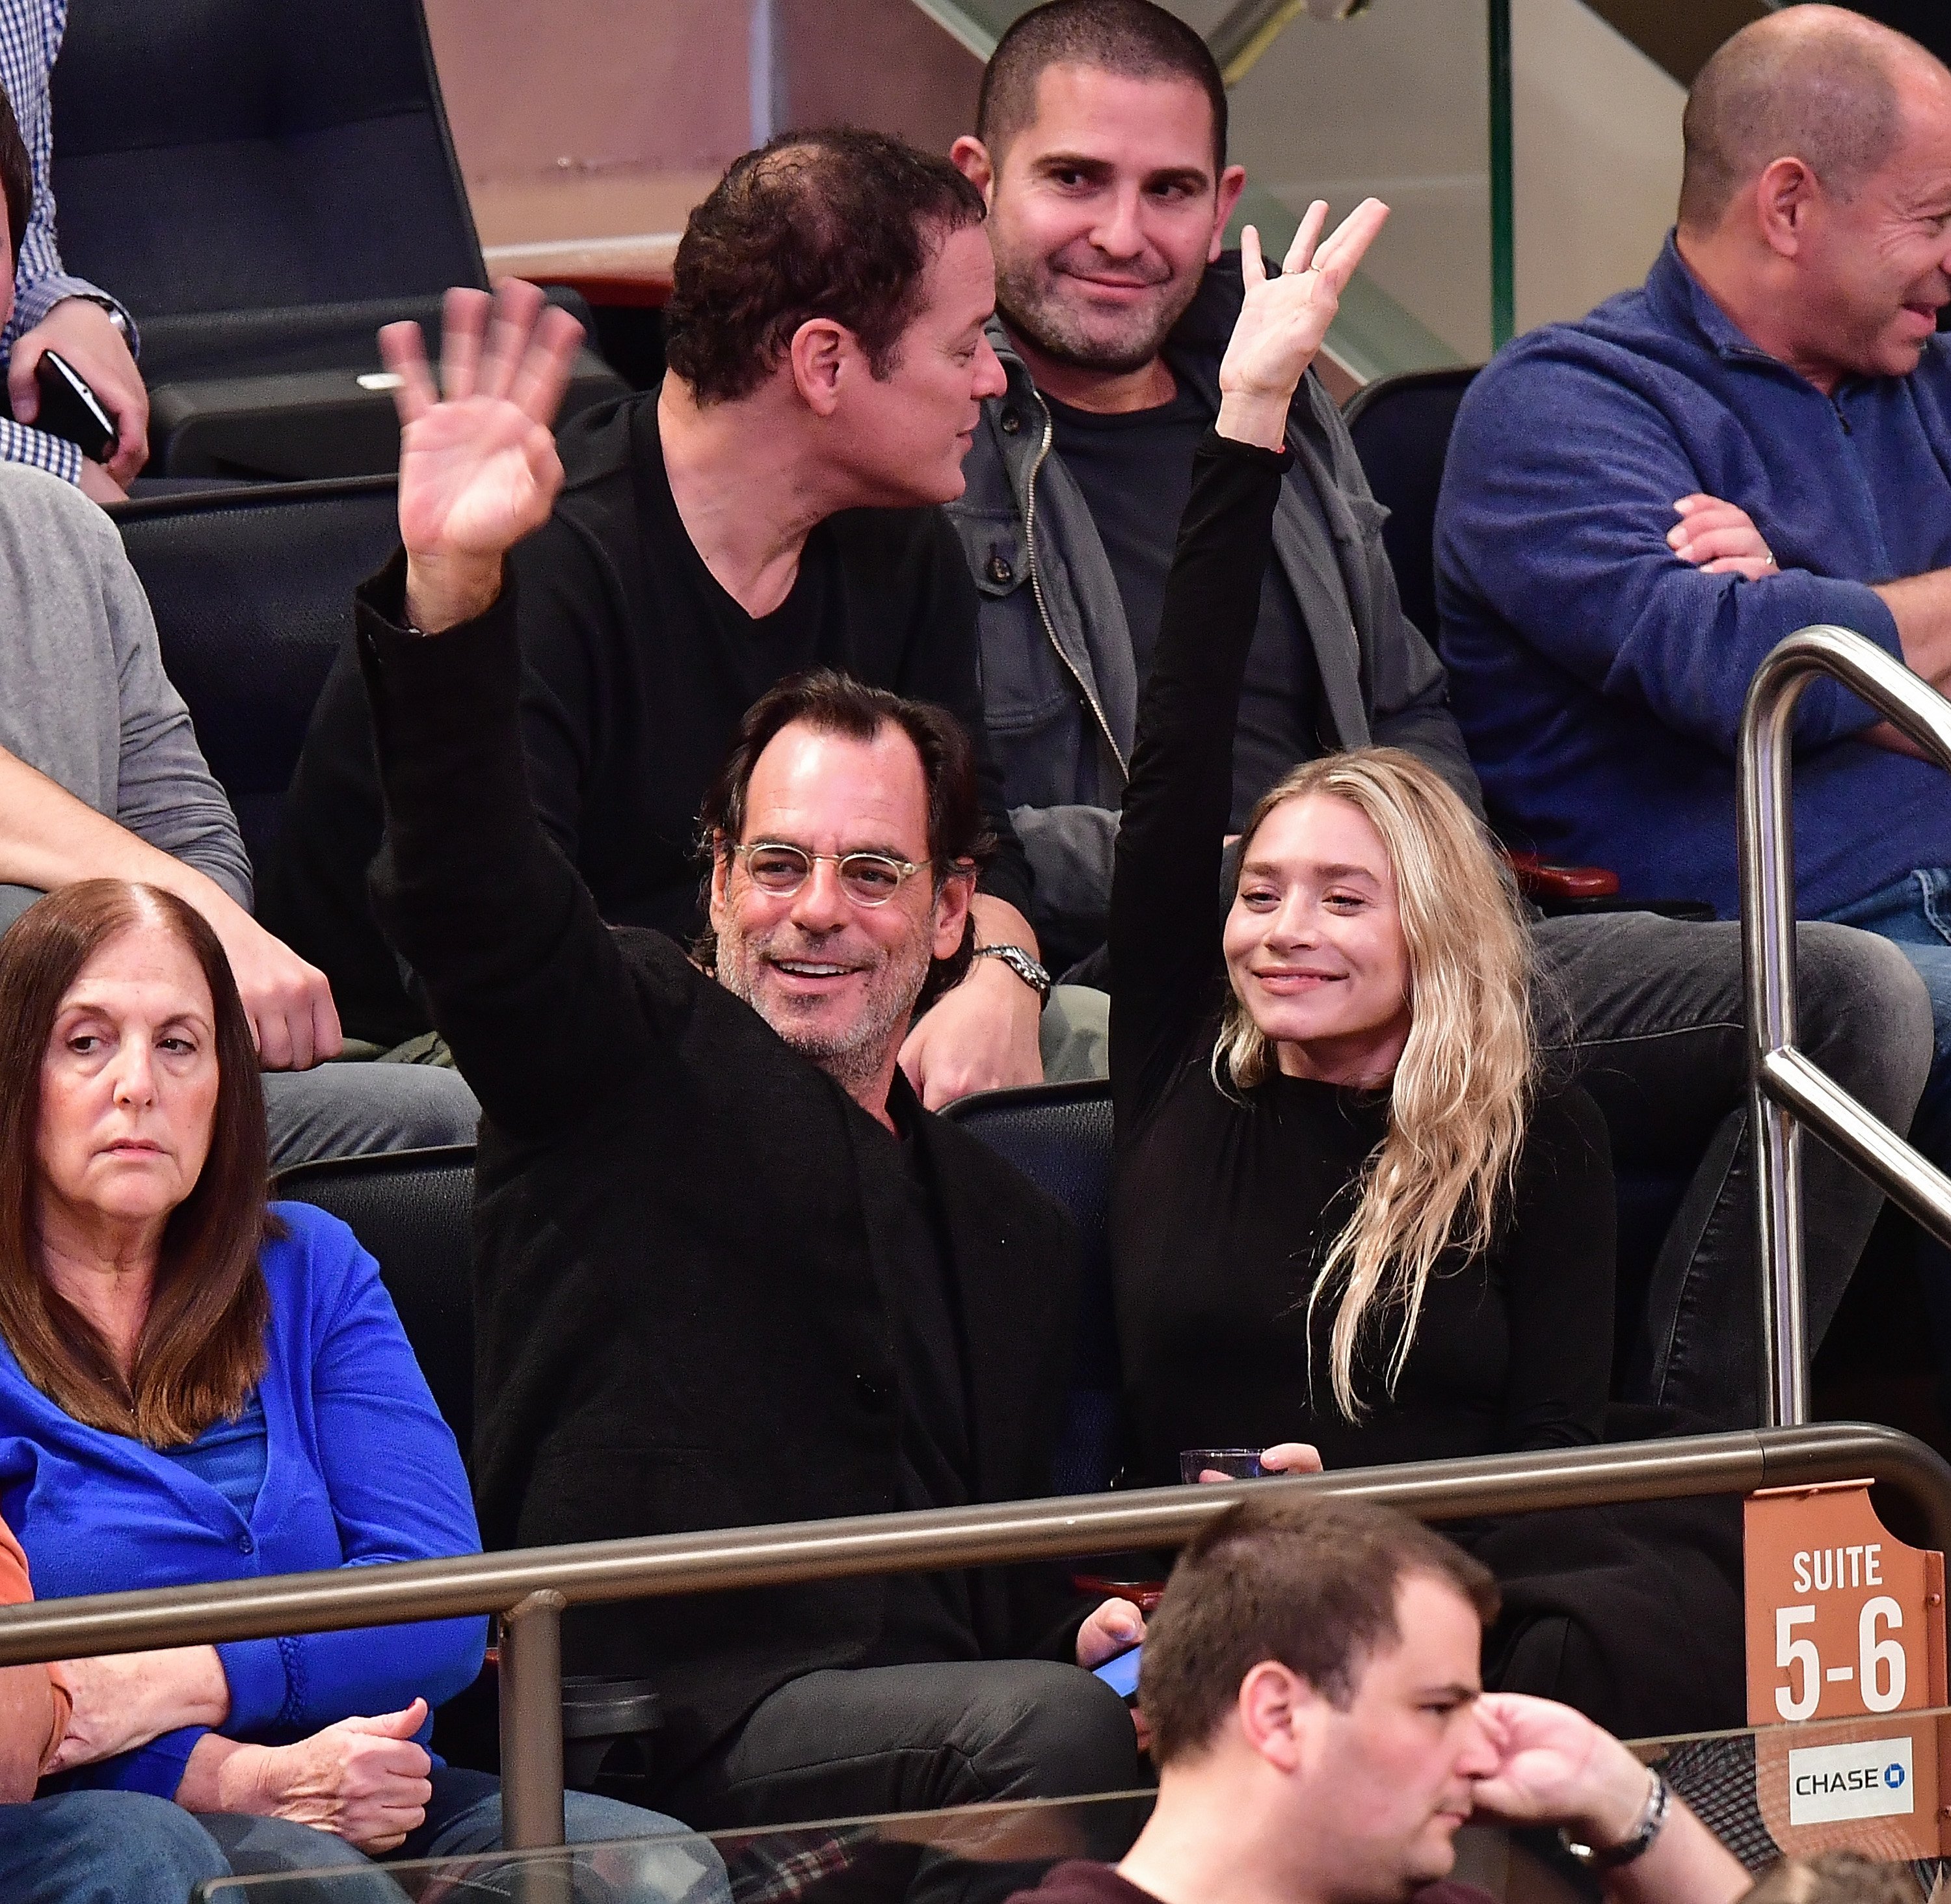 Ashley Olsen and Richard Sachs at New York Knicks vs Brooklyn Nets game at Madison Square Garden on November 9, 2016 in New York City. | Source: Getty Images